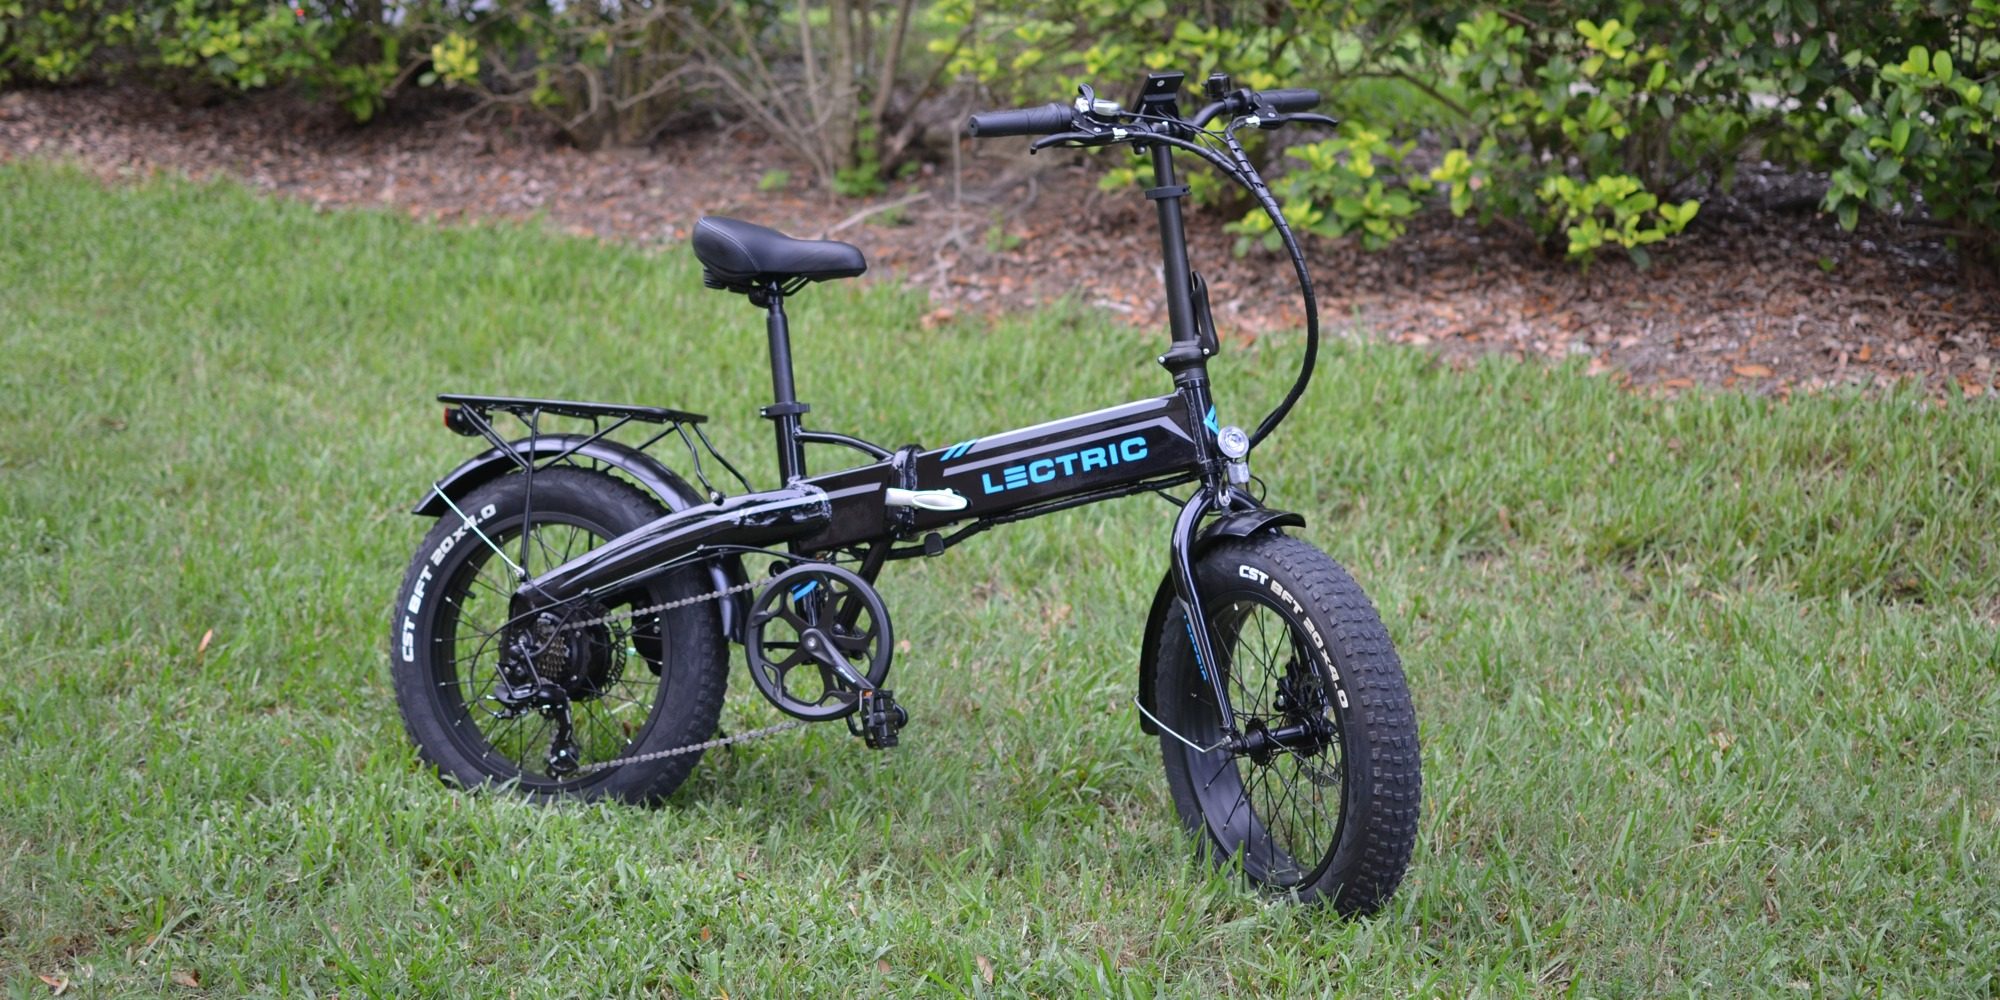 How the $899 Lectric XP went from garage e-bike startup to a $20M+ giant - blog - 1